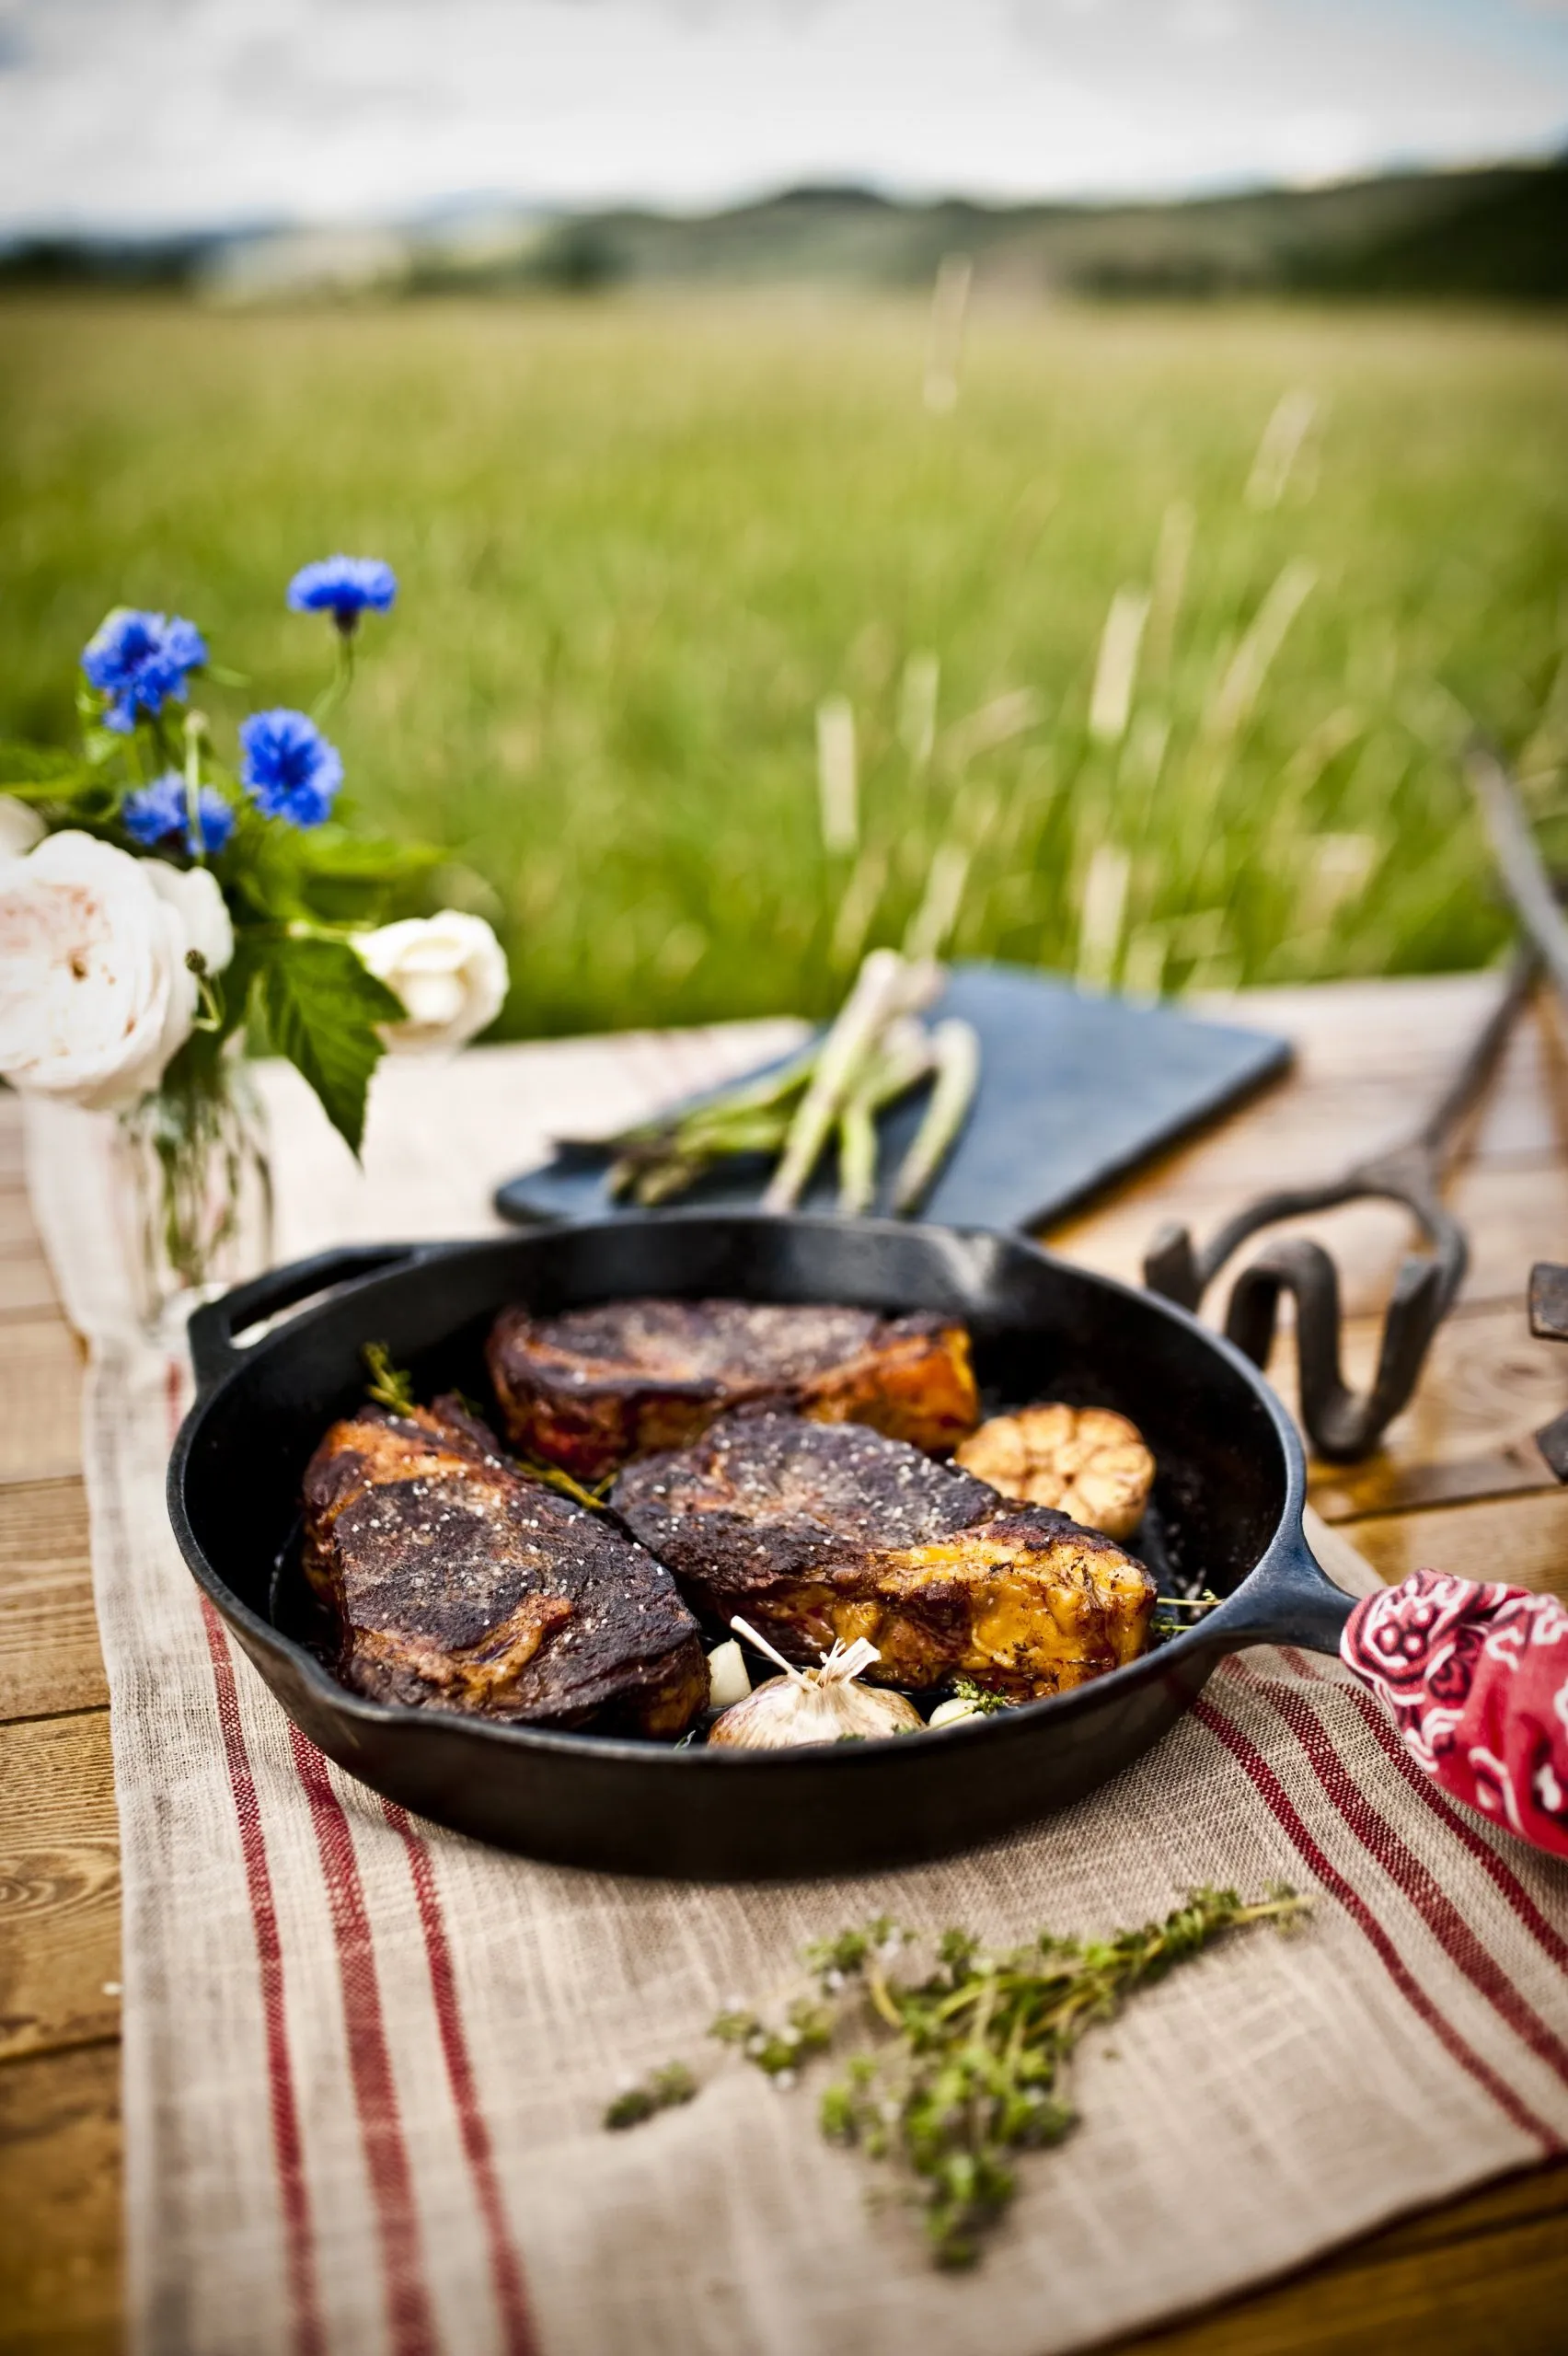 Three cooked steaks in an iron skillet on a wooden table outside